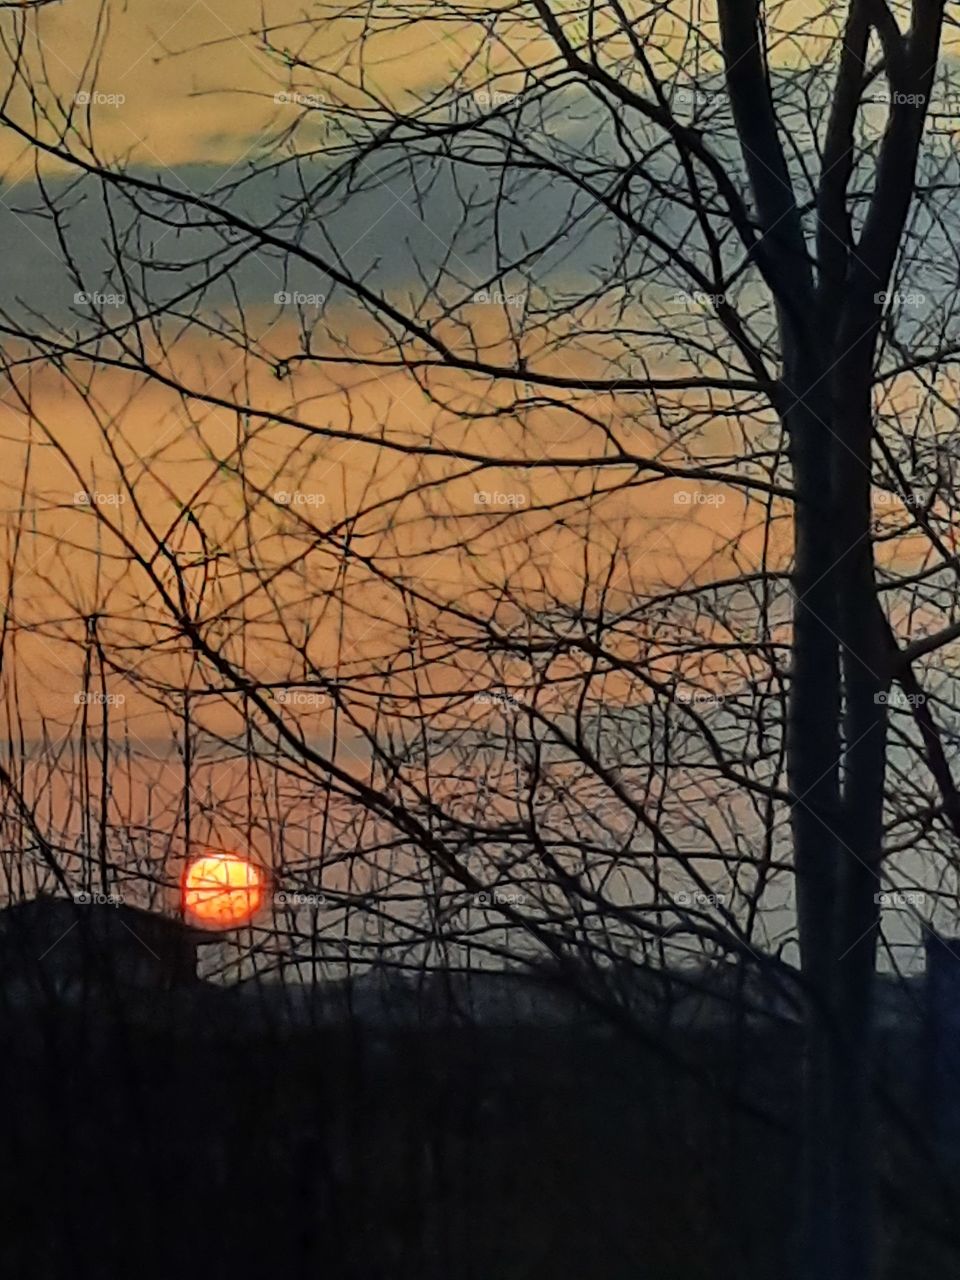 sunrise with orange sky and black silhouettes of trees